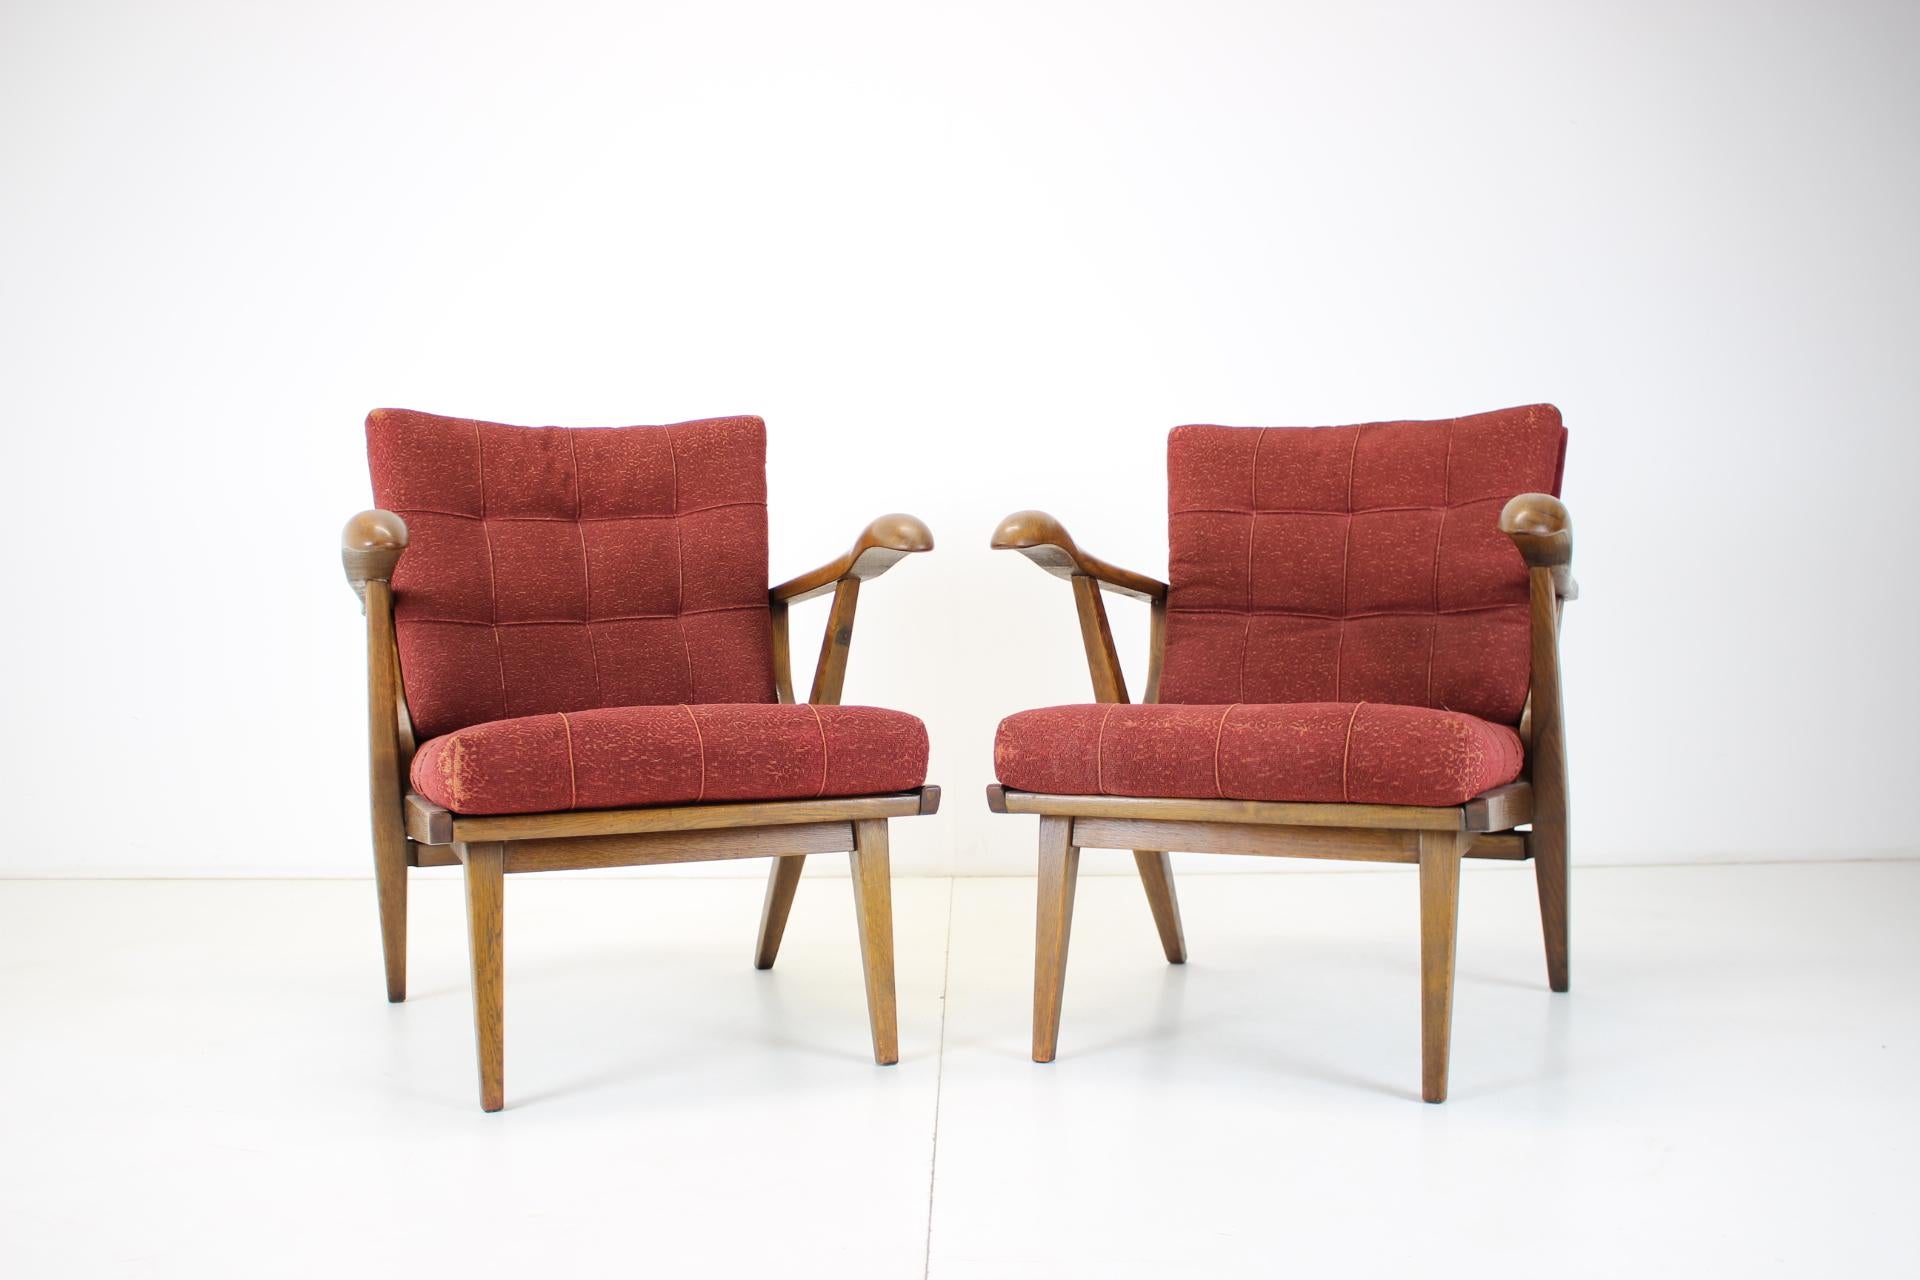 -Good original condition
-Wooden parts partially restored.
-Made of oak.
-Back part under upholstery newly covered with cloth.
-Can be upholstered according to your requirements.